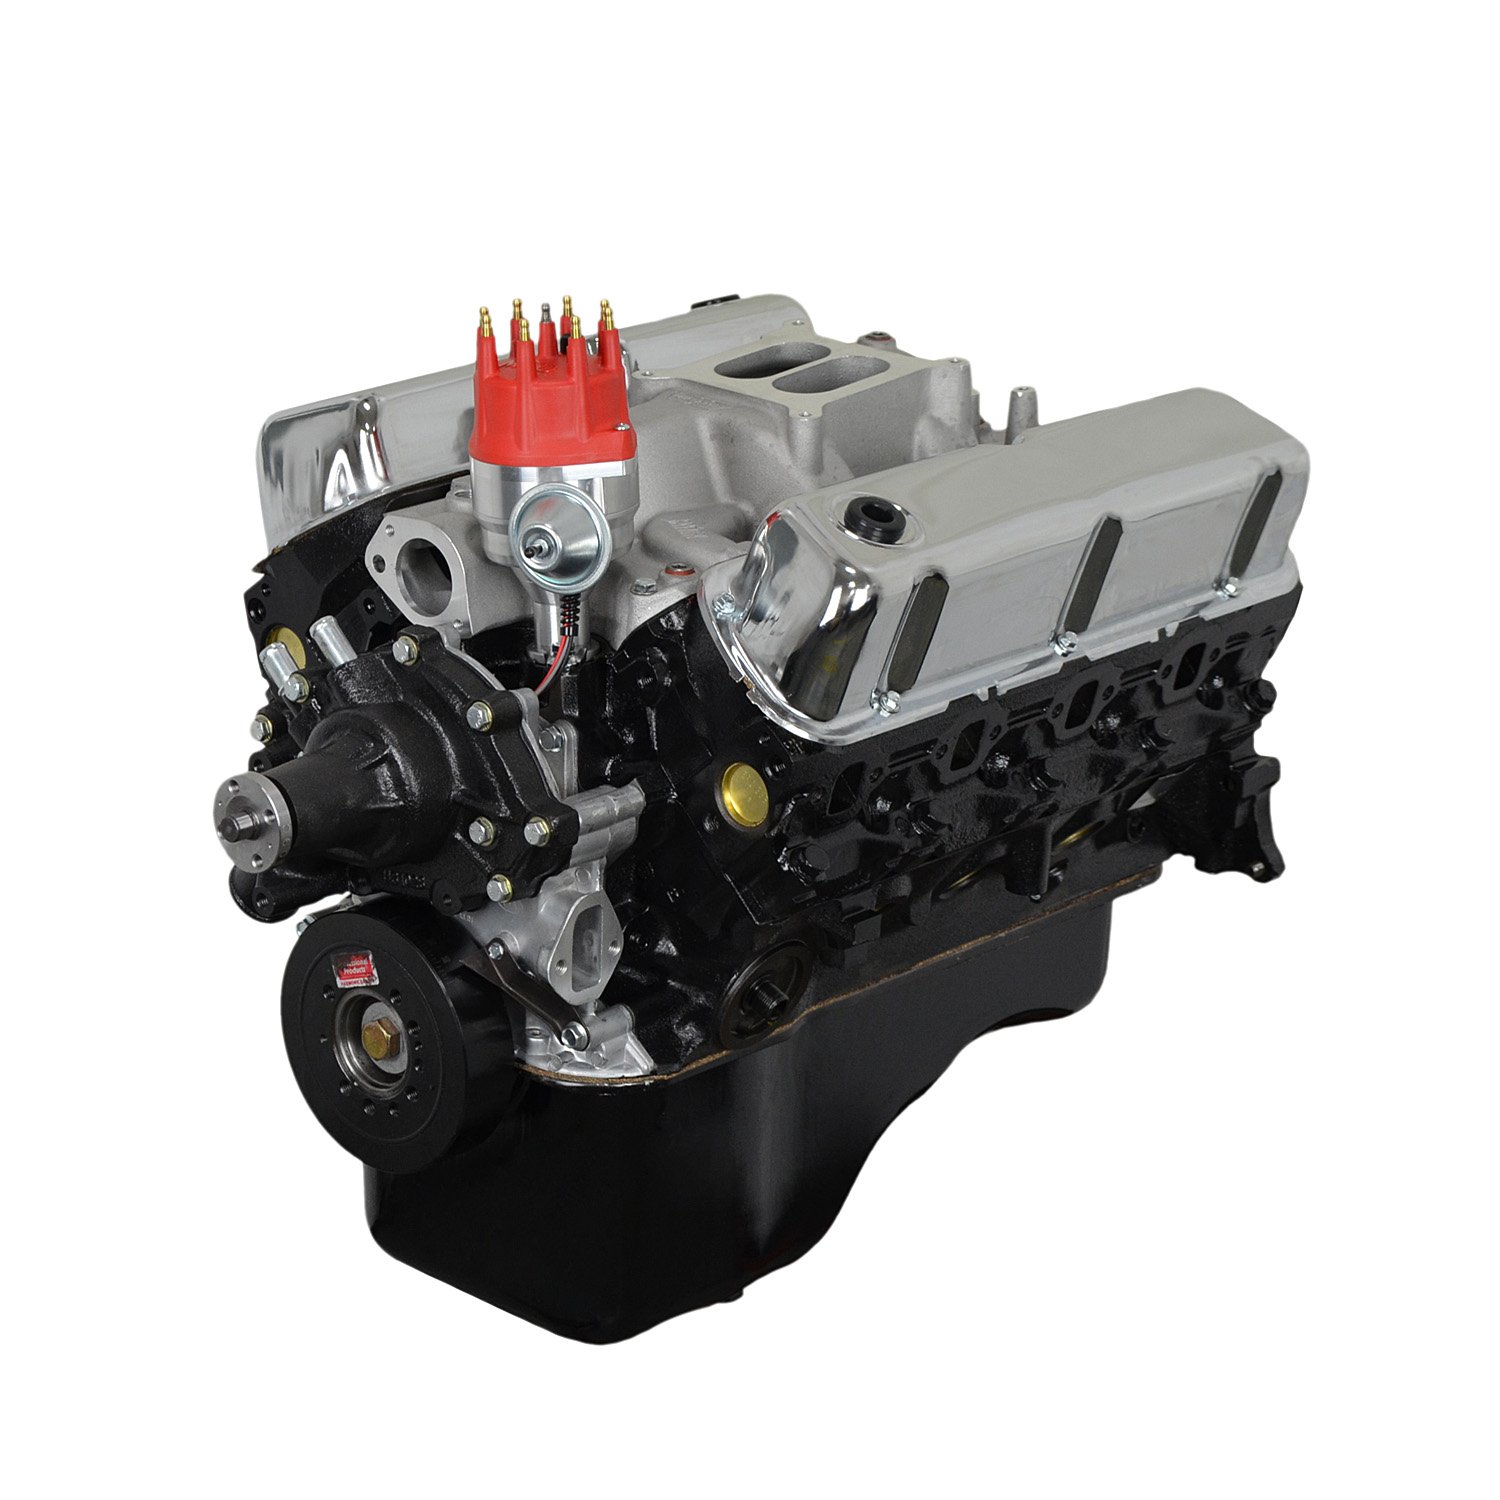 HP79M High Performance Crate Engine Small Block Ford 302ci / 300HP / 336TQ